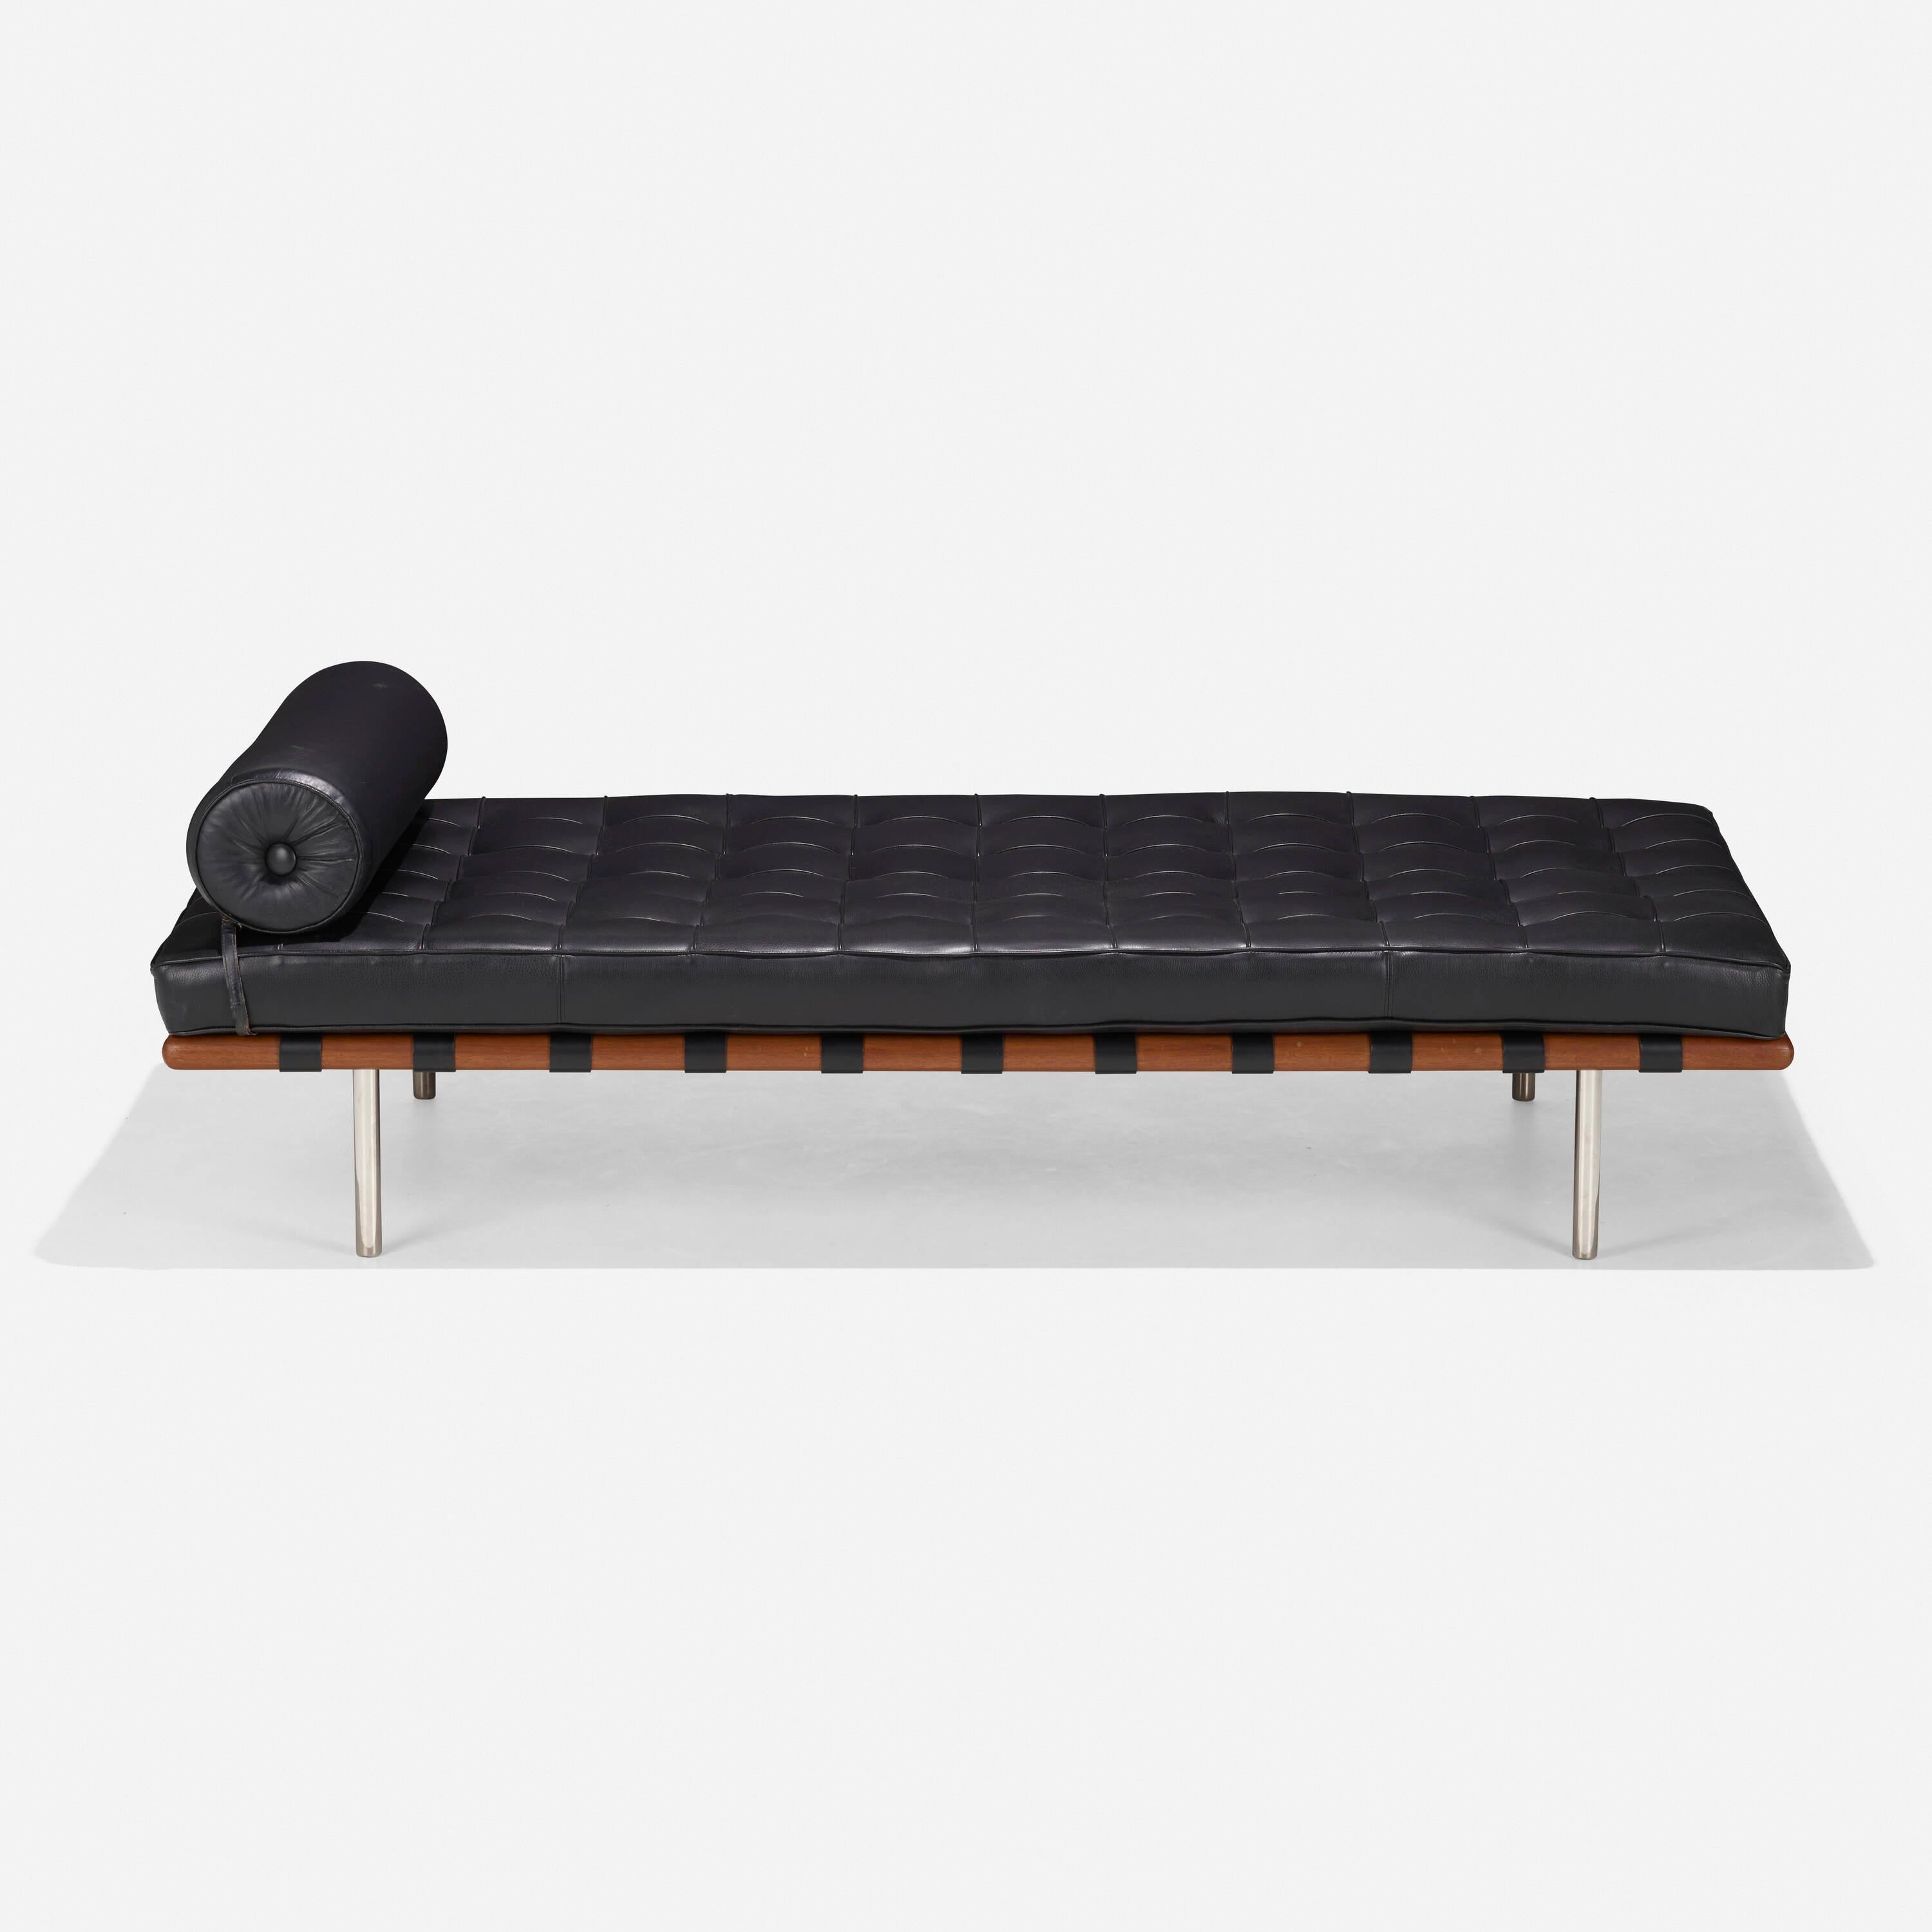 iconic Ludwig Mies van der Rohe Barcelona Daybed. Knoll International
Germany, c. 1986. Chrome-plated stainless steel, walnut, and leather. Also available in white leather.